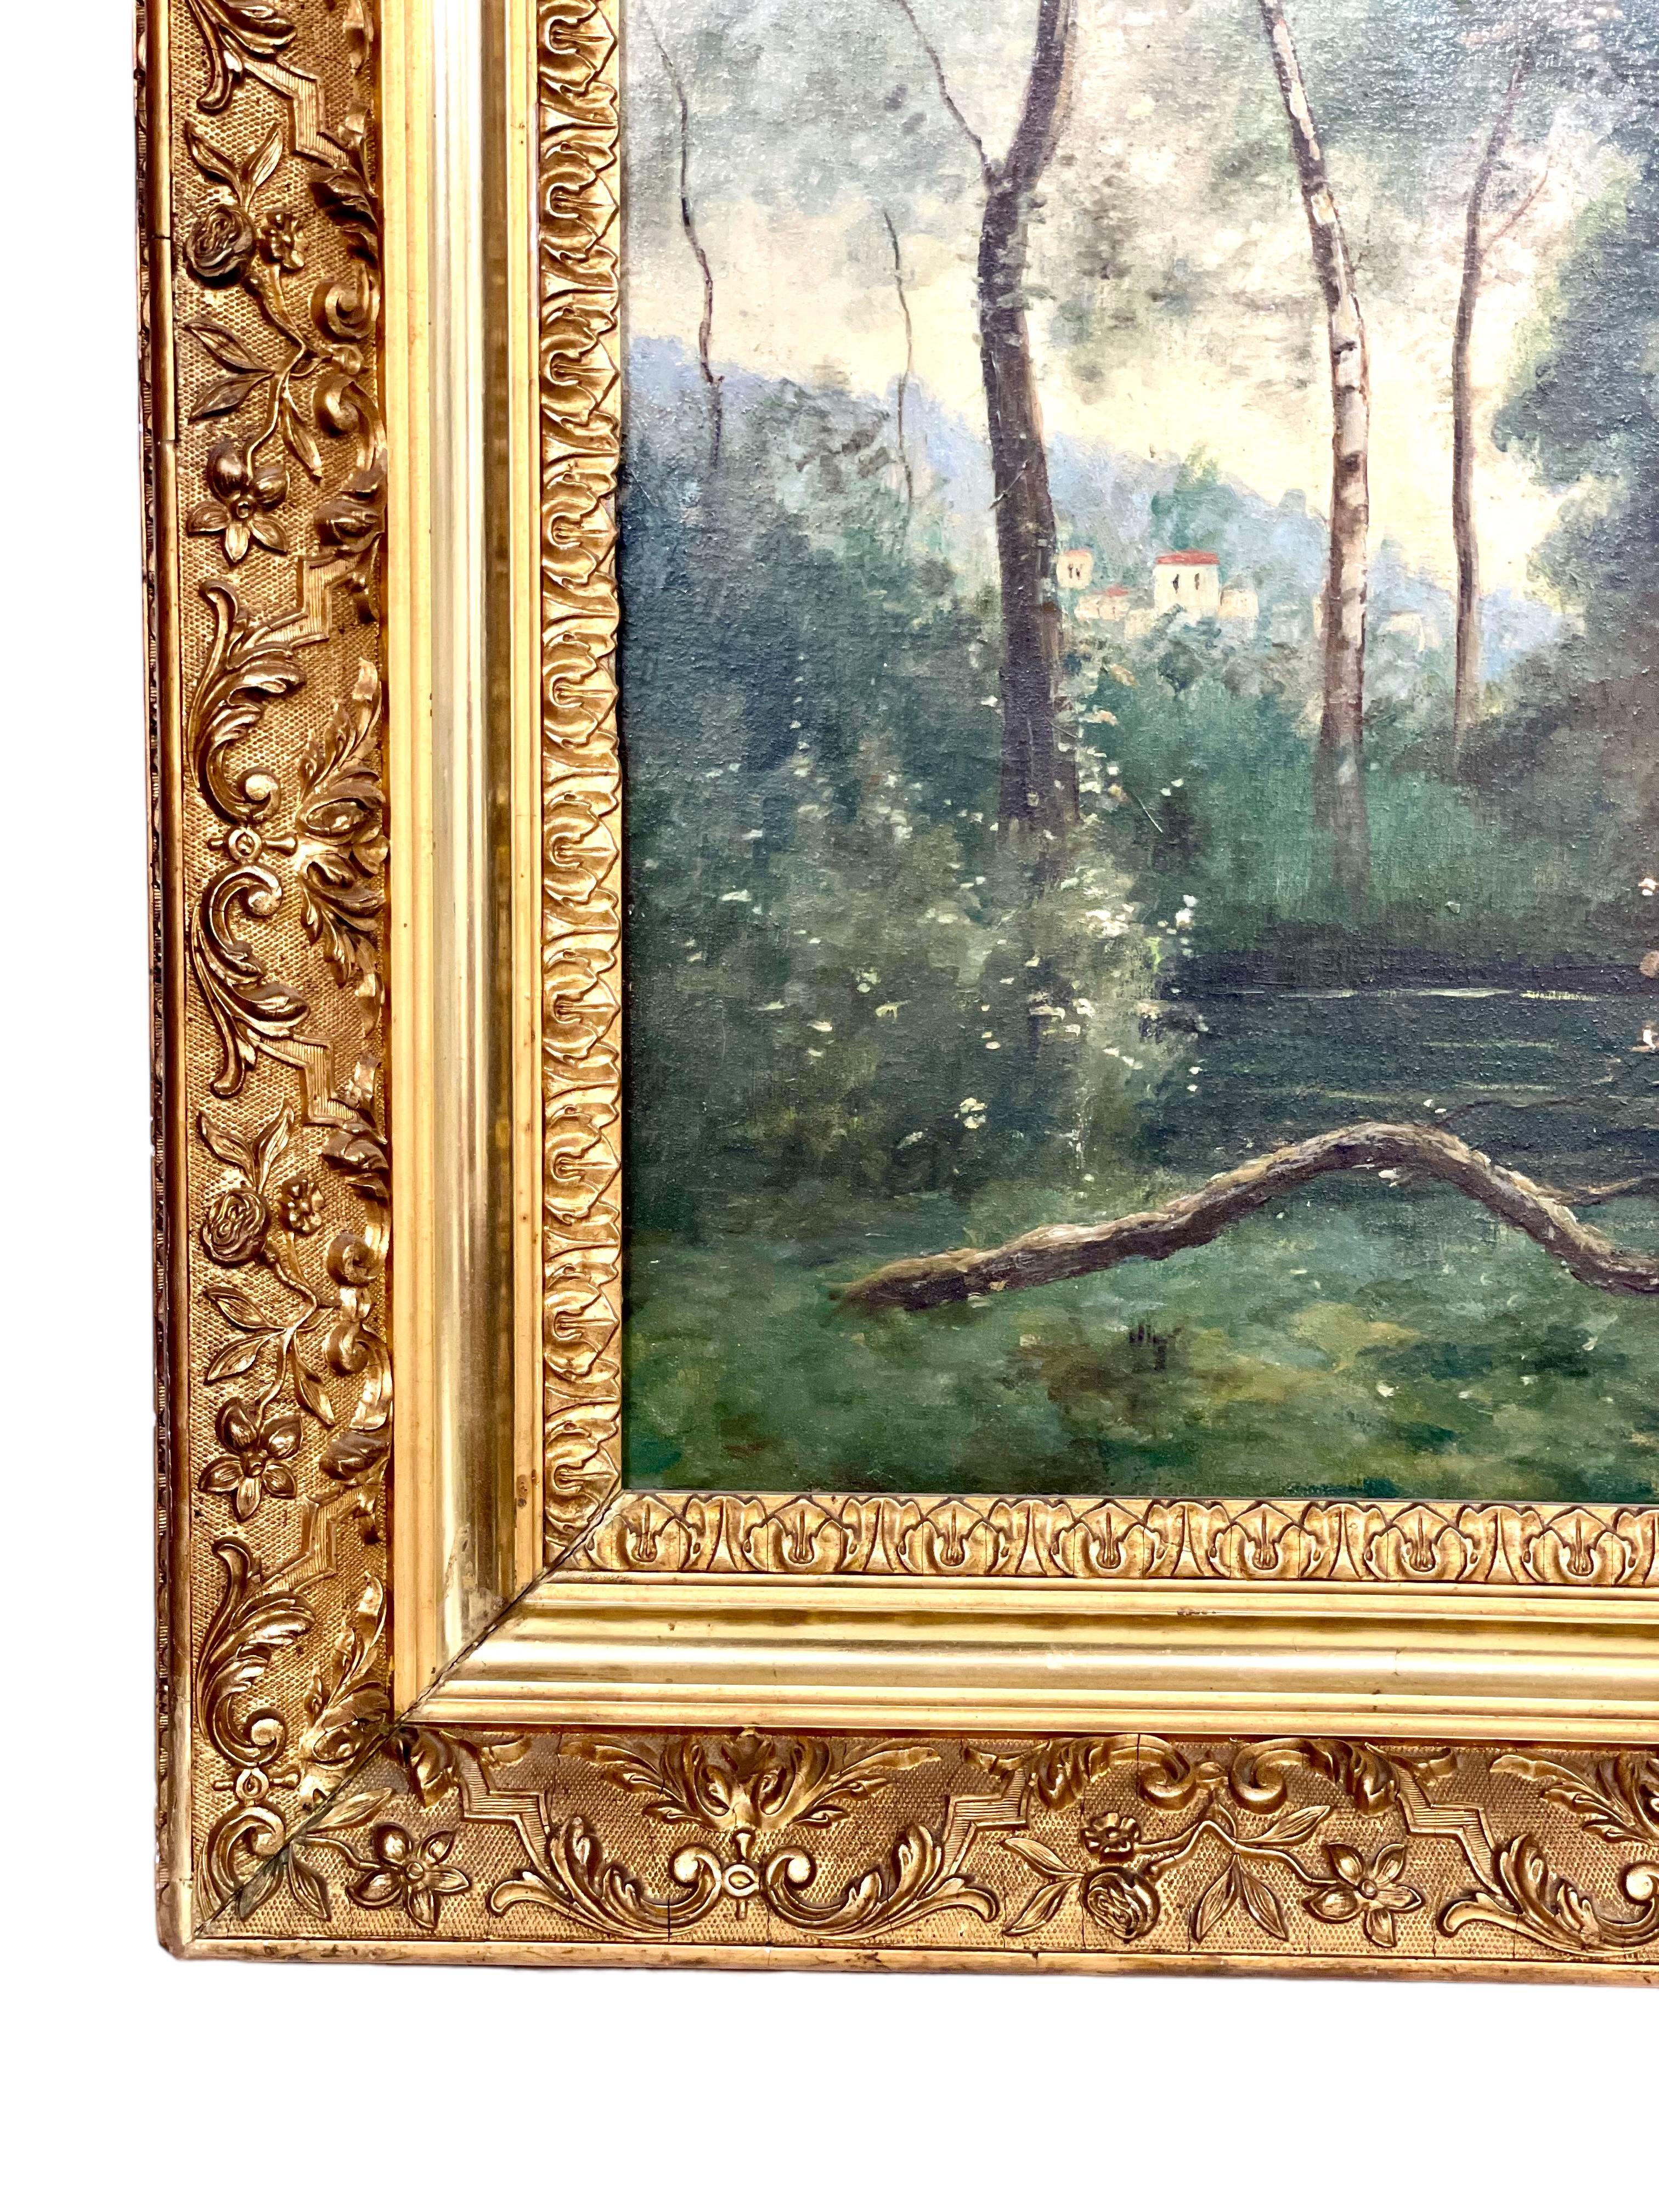 Hand-Painted Large Oil on Panel 'The Cowherder by the Pond', by Charles Dhuin For Sale